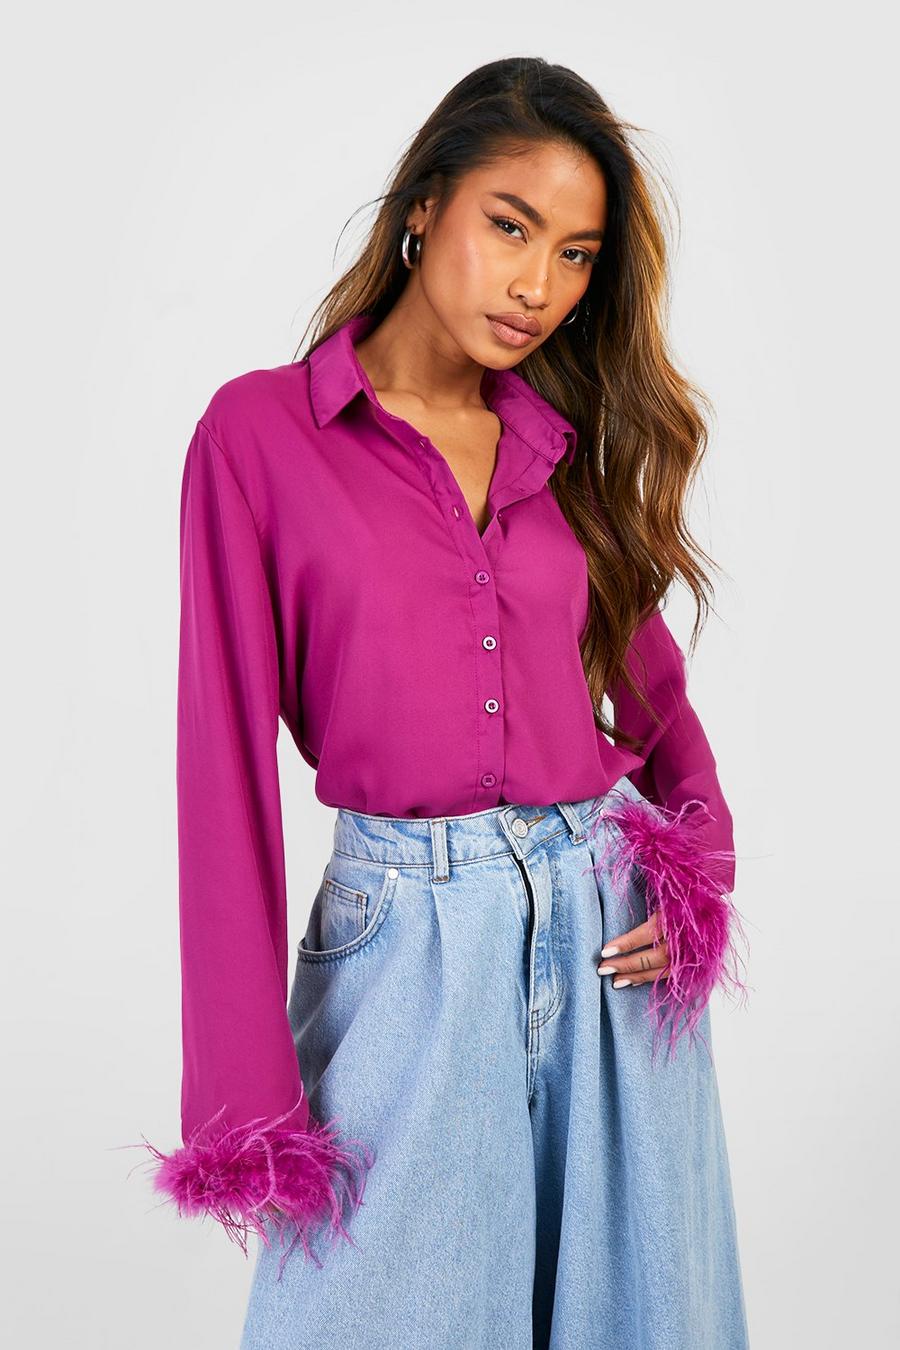  Blouses for Women Down with Pocket Tops Under $10 Lightening  desls of The Day Women Tops and Blouses Sexy Liquidation pallets of Bulk  Sexy Shirt Womens Clothes Under 10 Dollars B-Blue 